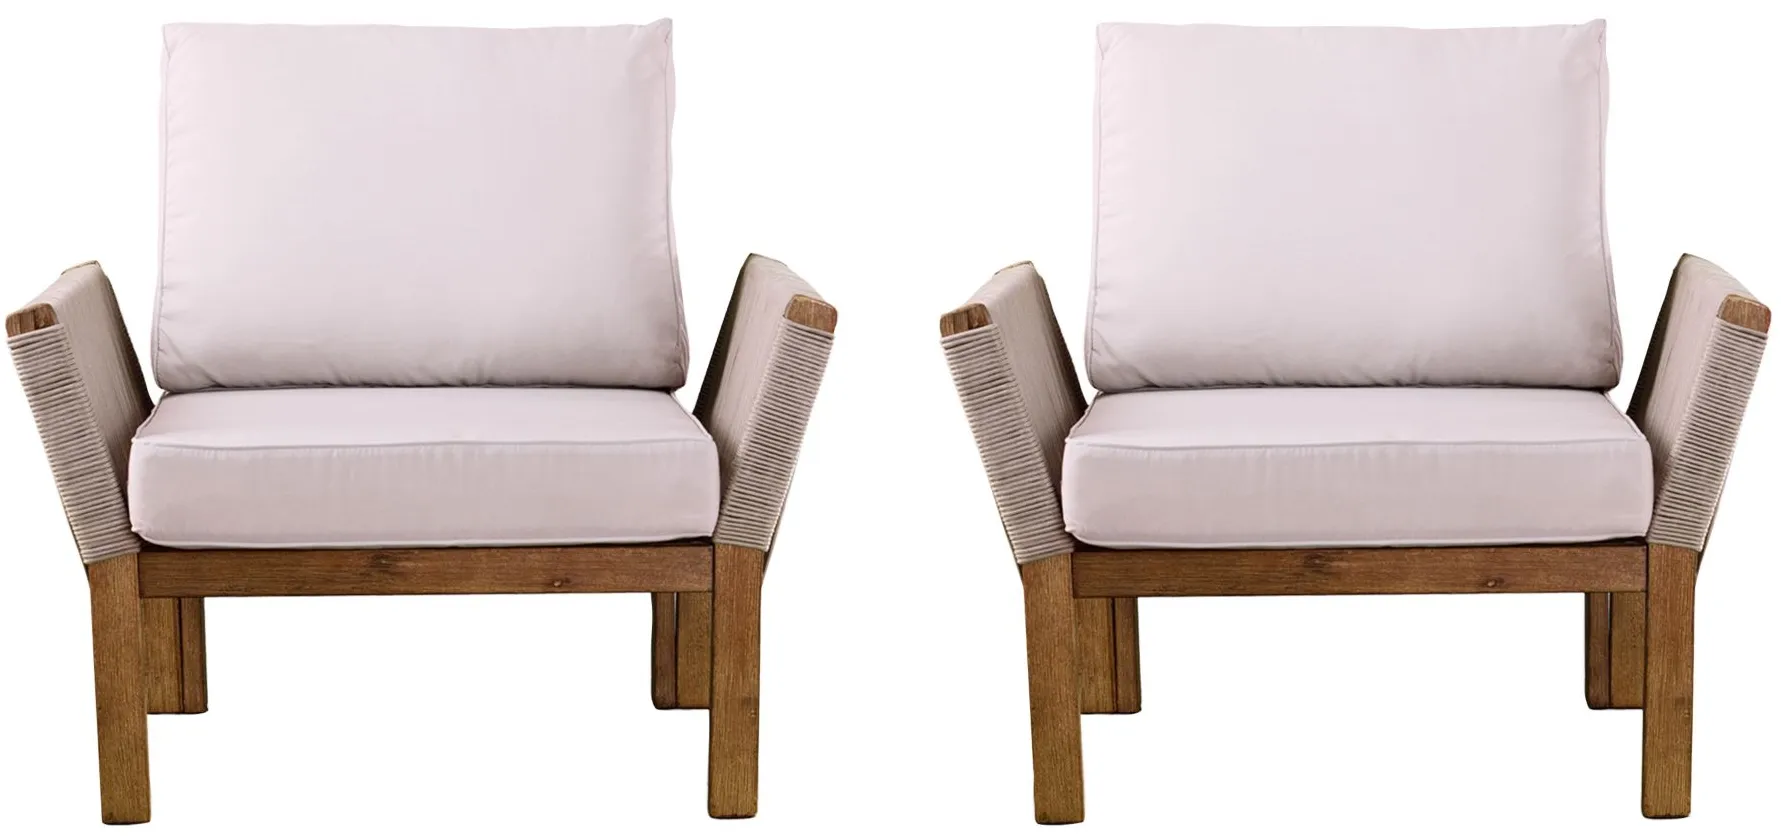 Savoy Outdoor Chairs - Set of 2 in Natural by SEI Furniture